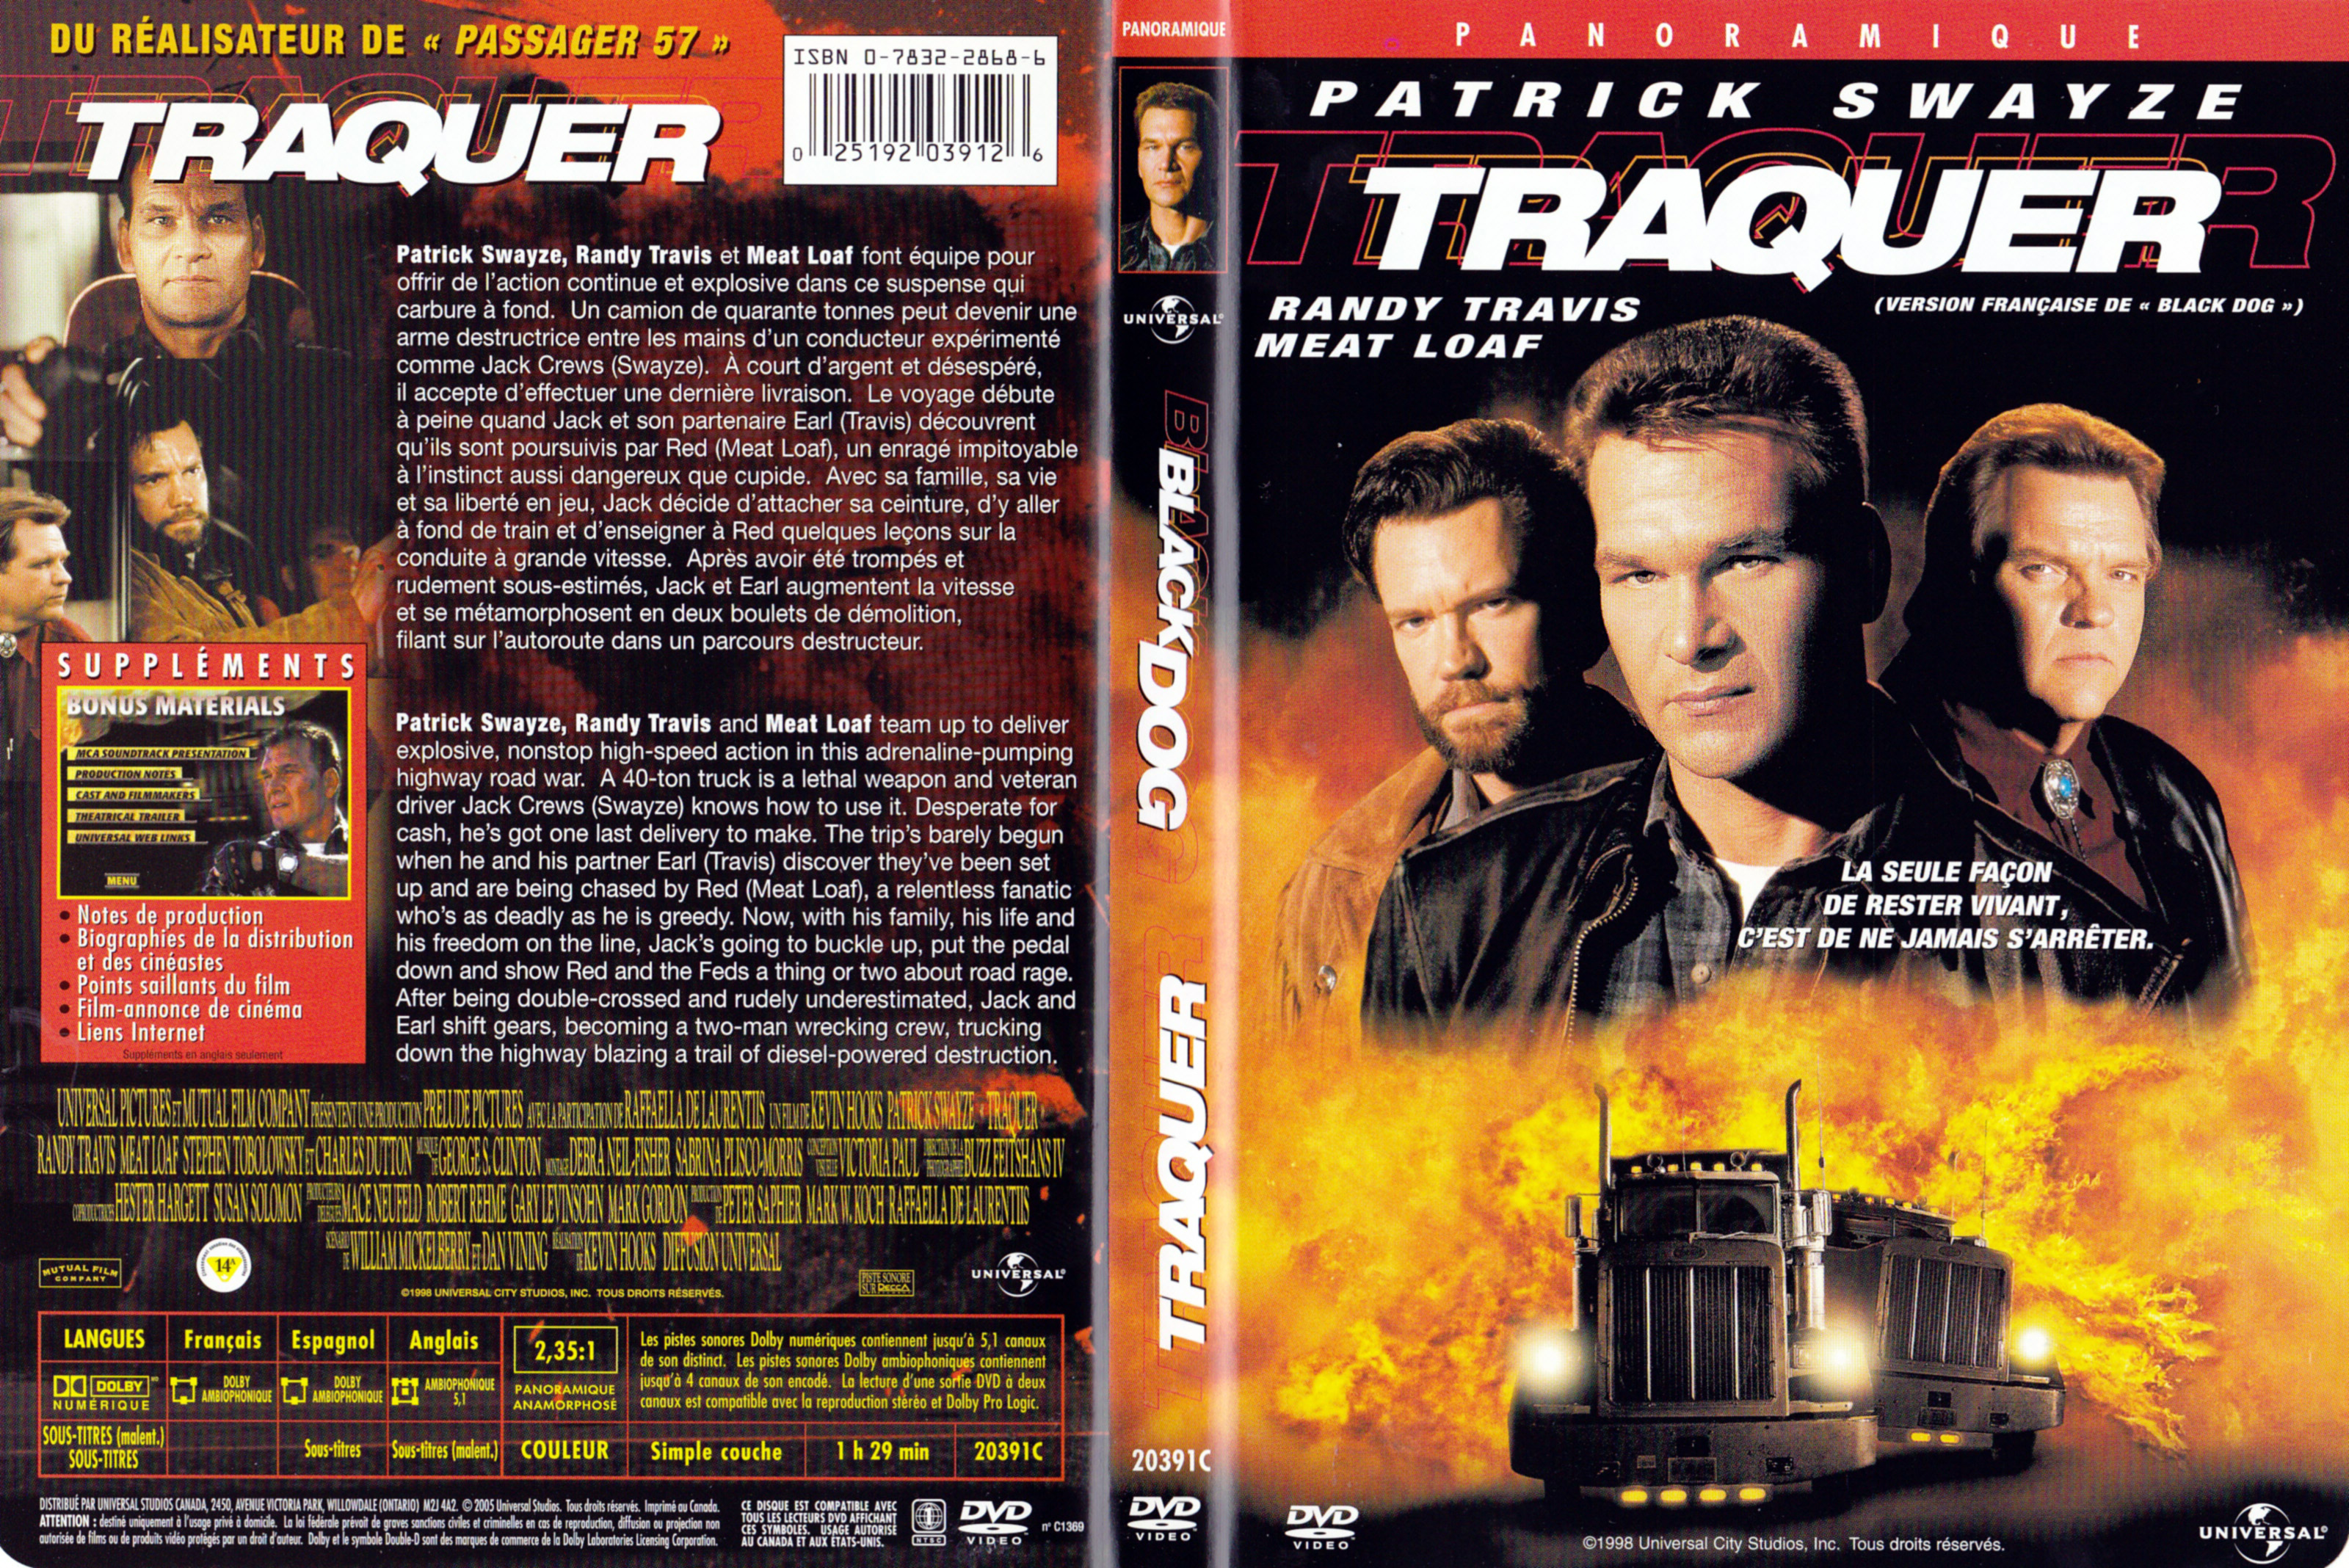 Jaquette DVD Traquer (Canadienne)